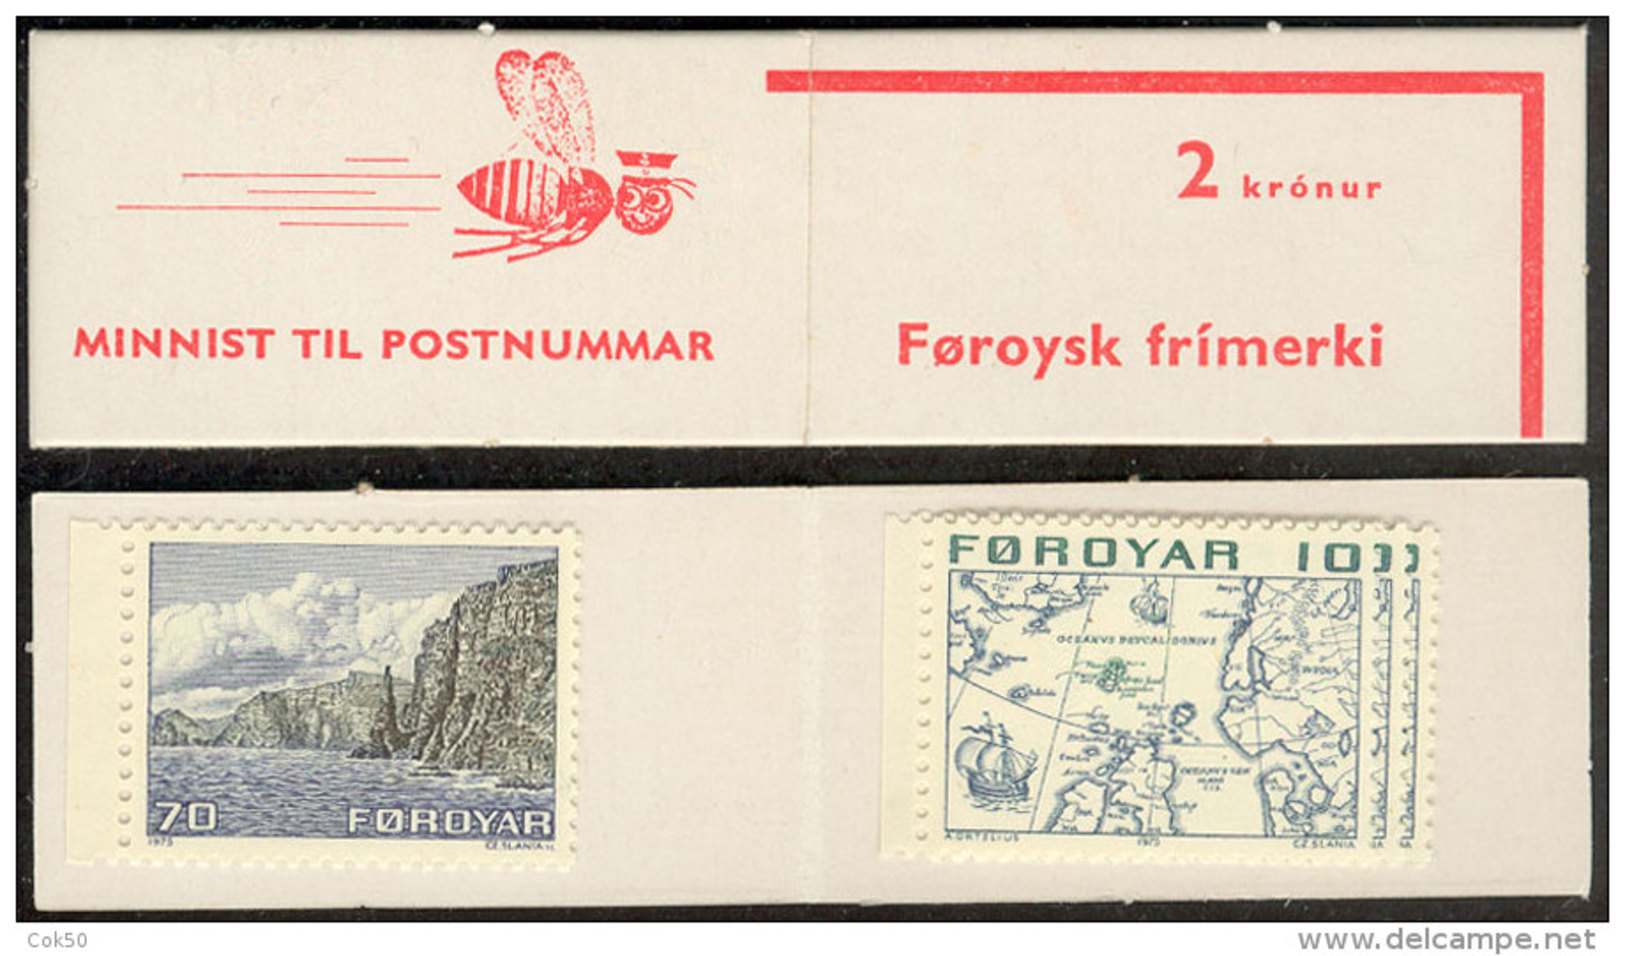 FAROE ISLANDS 1975 - Automat Booklet MNH, Stamps Mounted In LEFT Margin. - Färöer Inseln